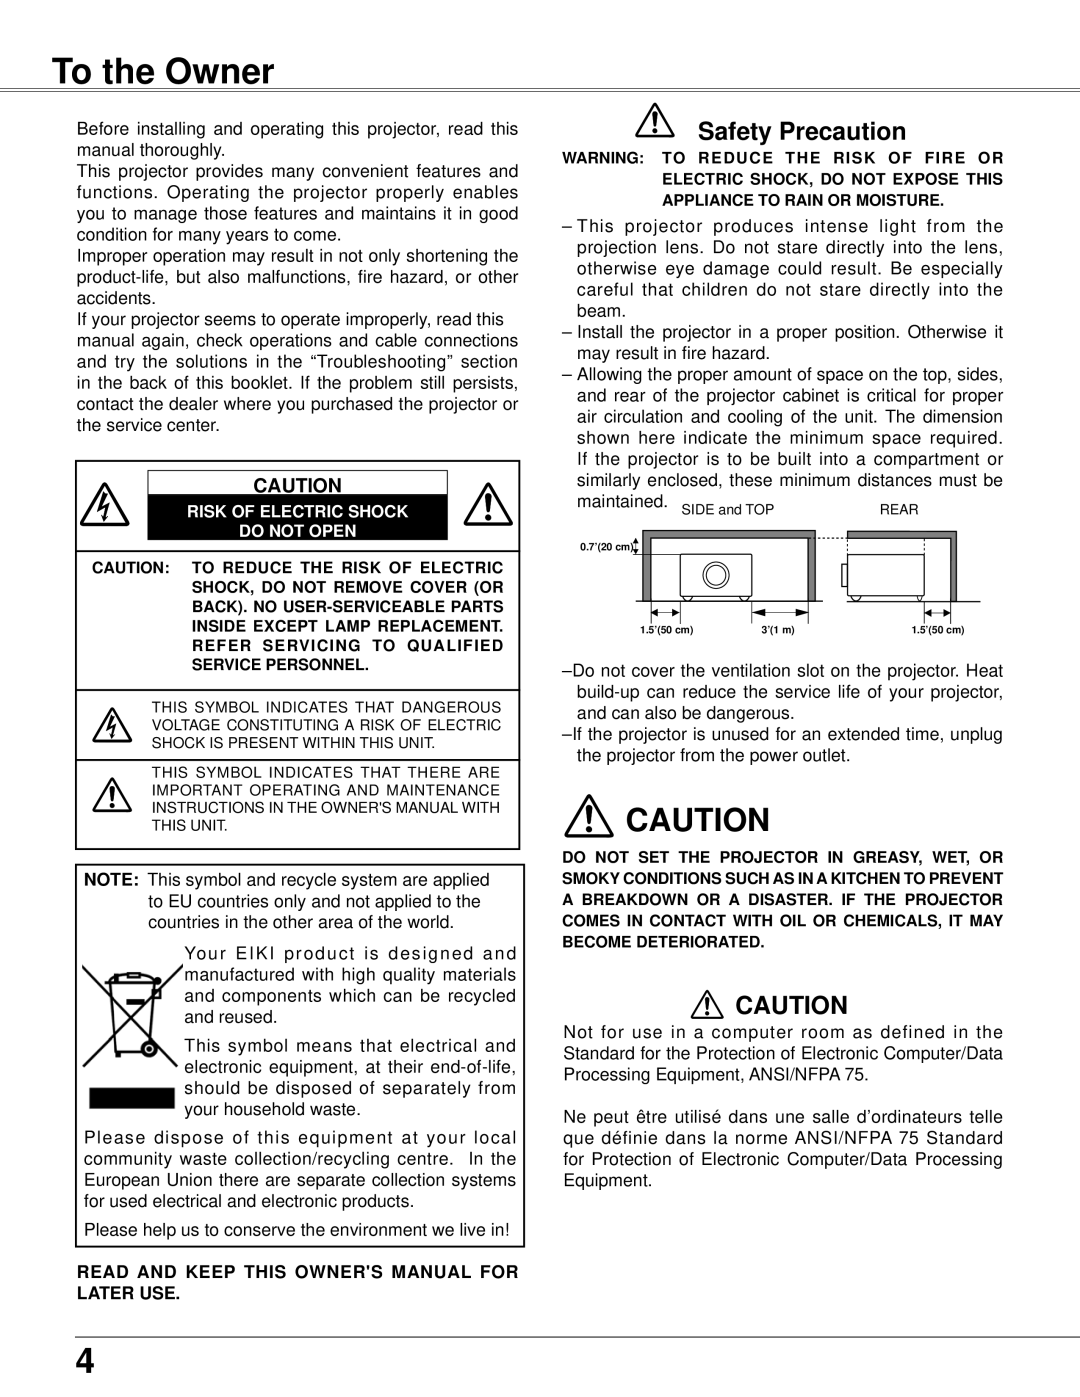 Eiki LC-XB42 owner manual To the Owner, Safety Precaution, Risk Of Electric Shock Do Not Open 